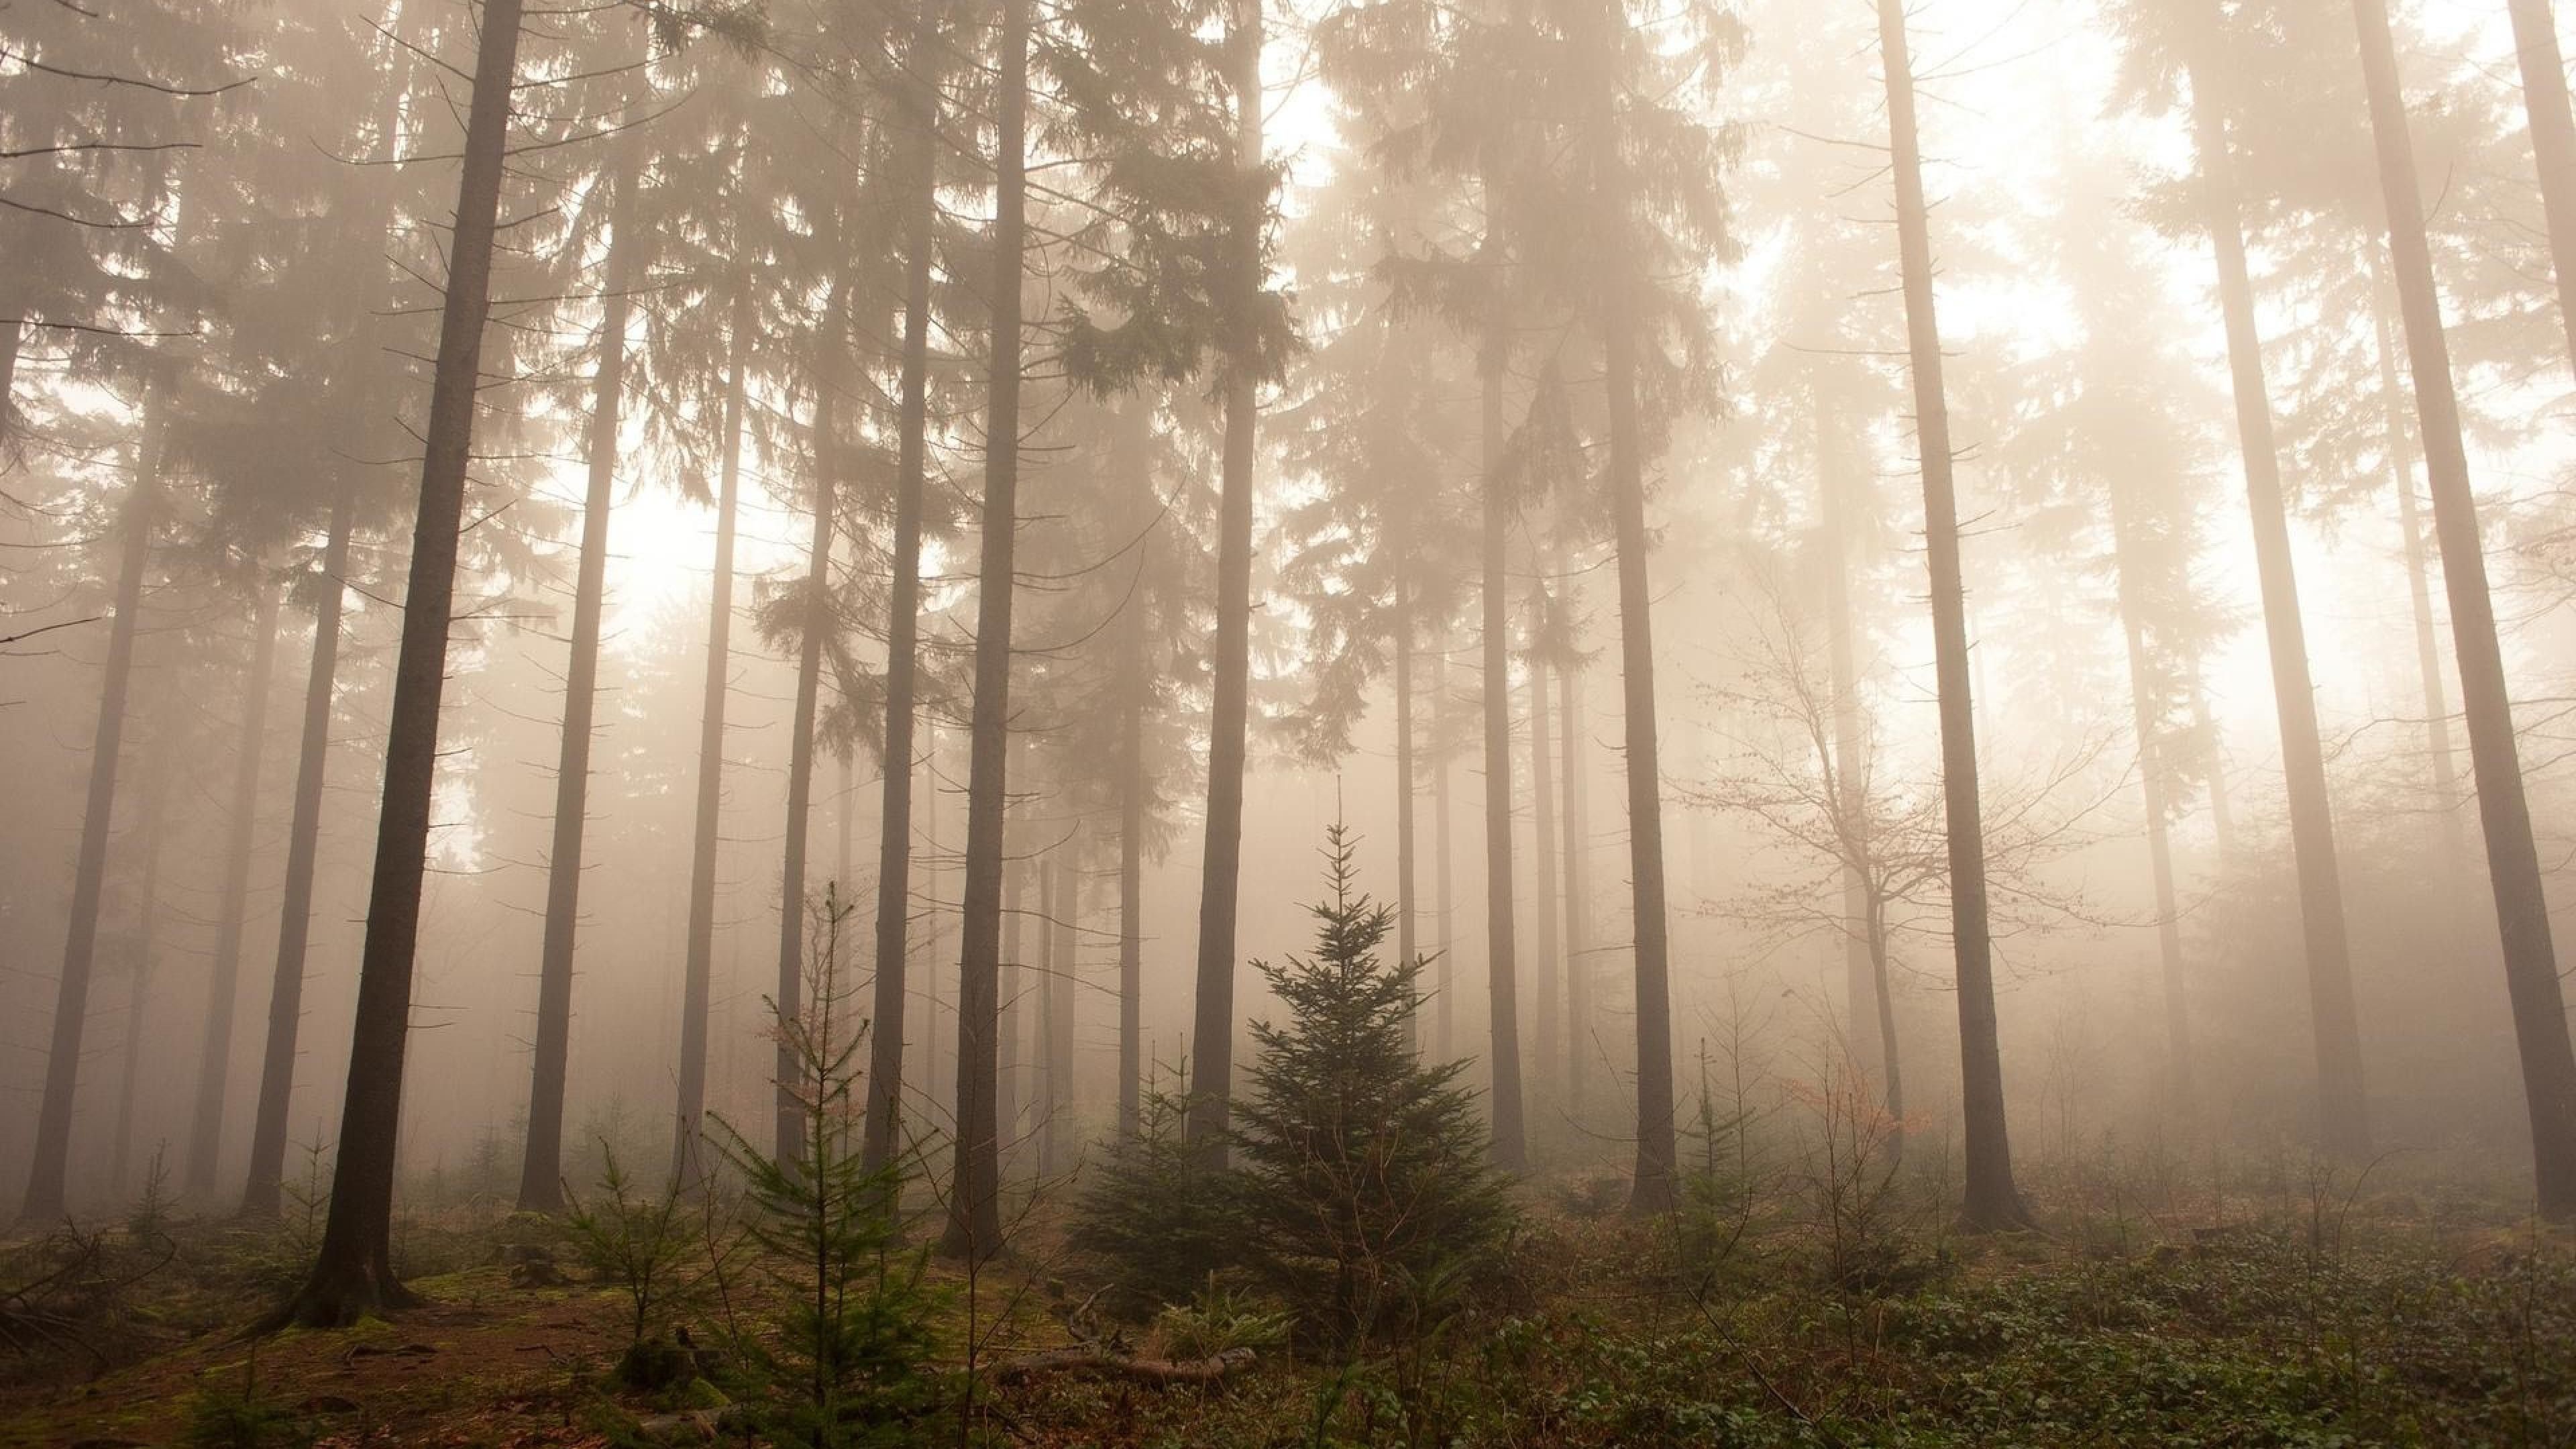 A forest with fog and trees in the background - Fog, foggy forest